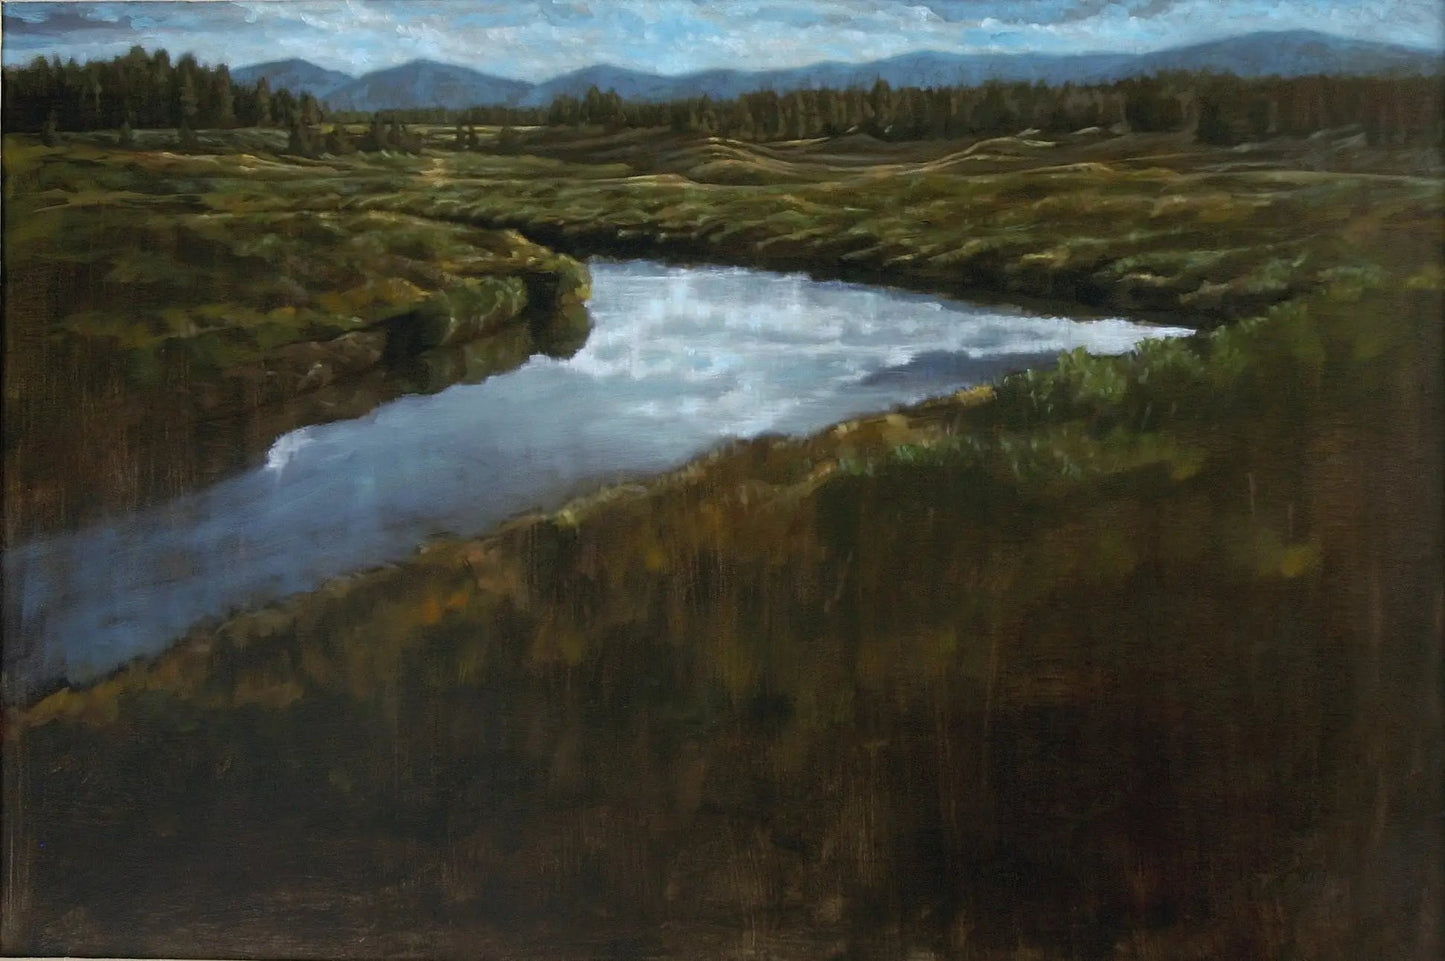 Landscape oil painting of reflections on a stream in South Fork. Painted by artist Tanya Pilling.